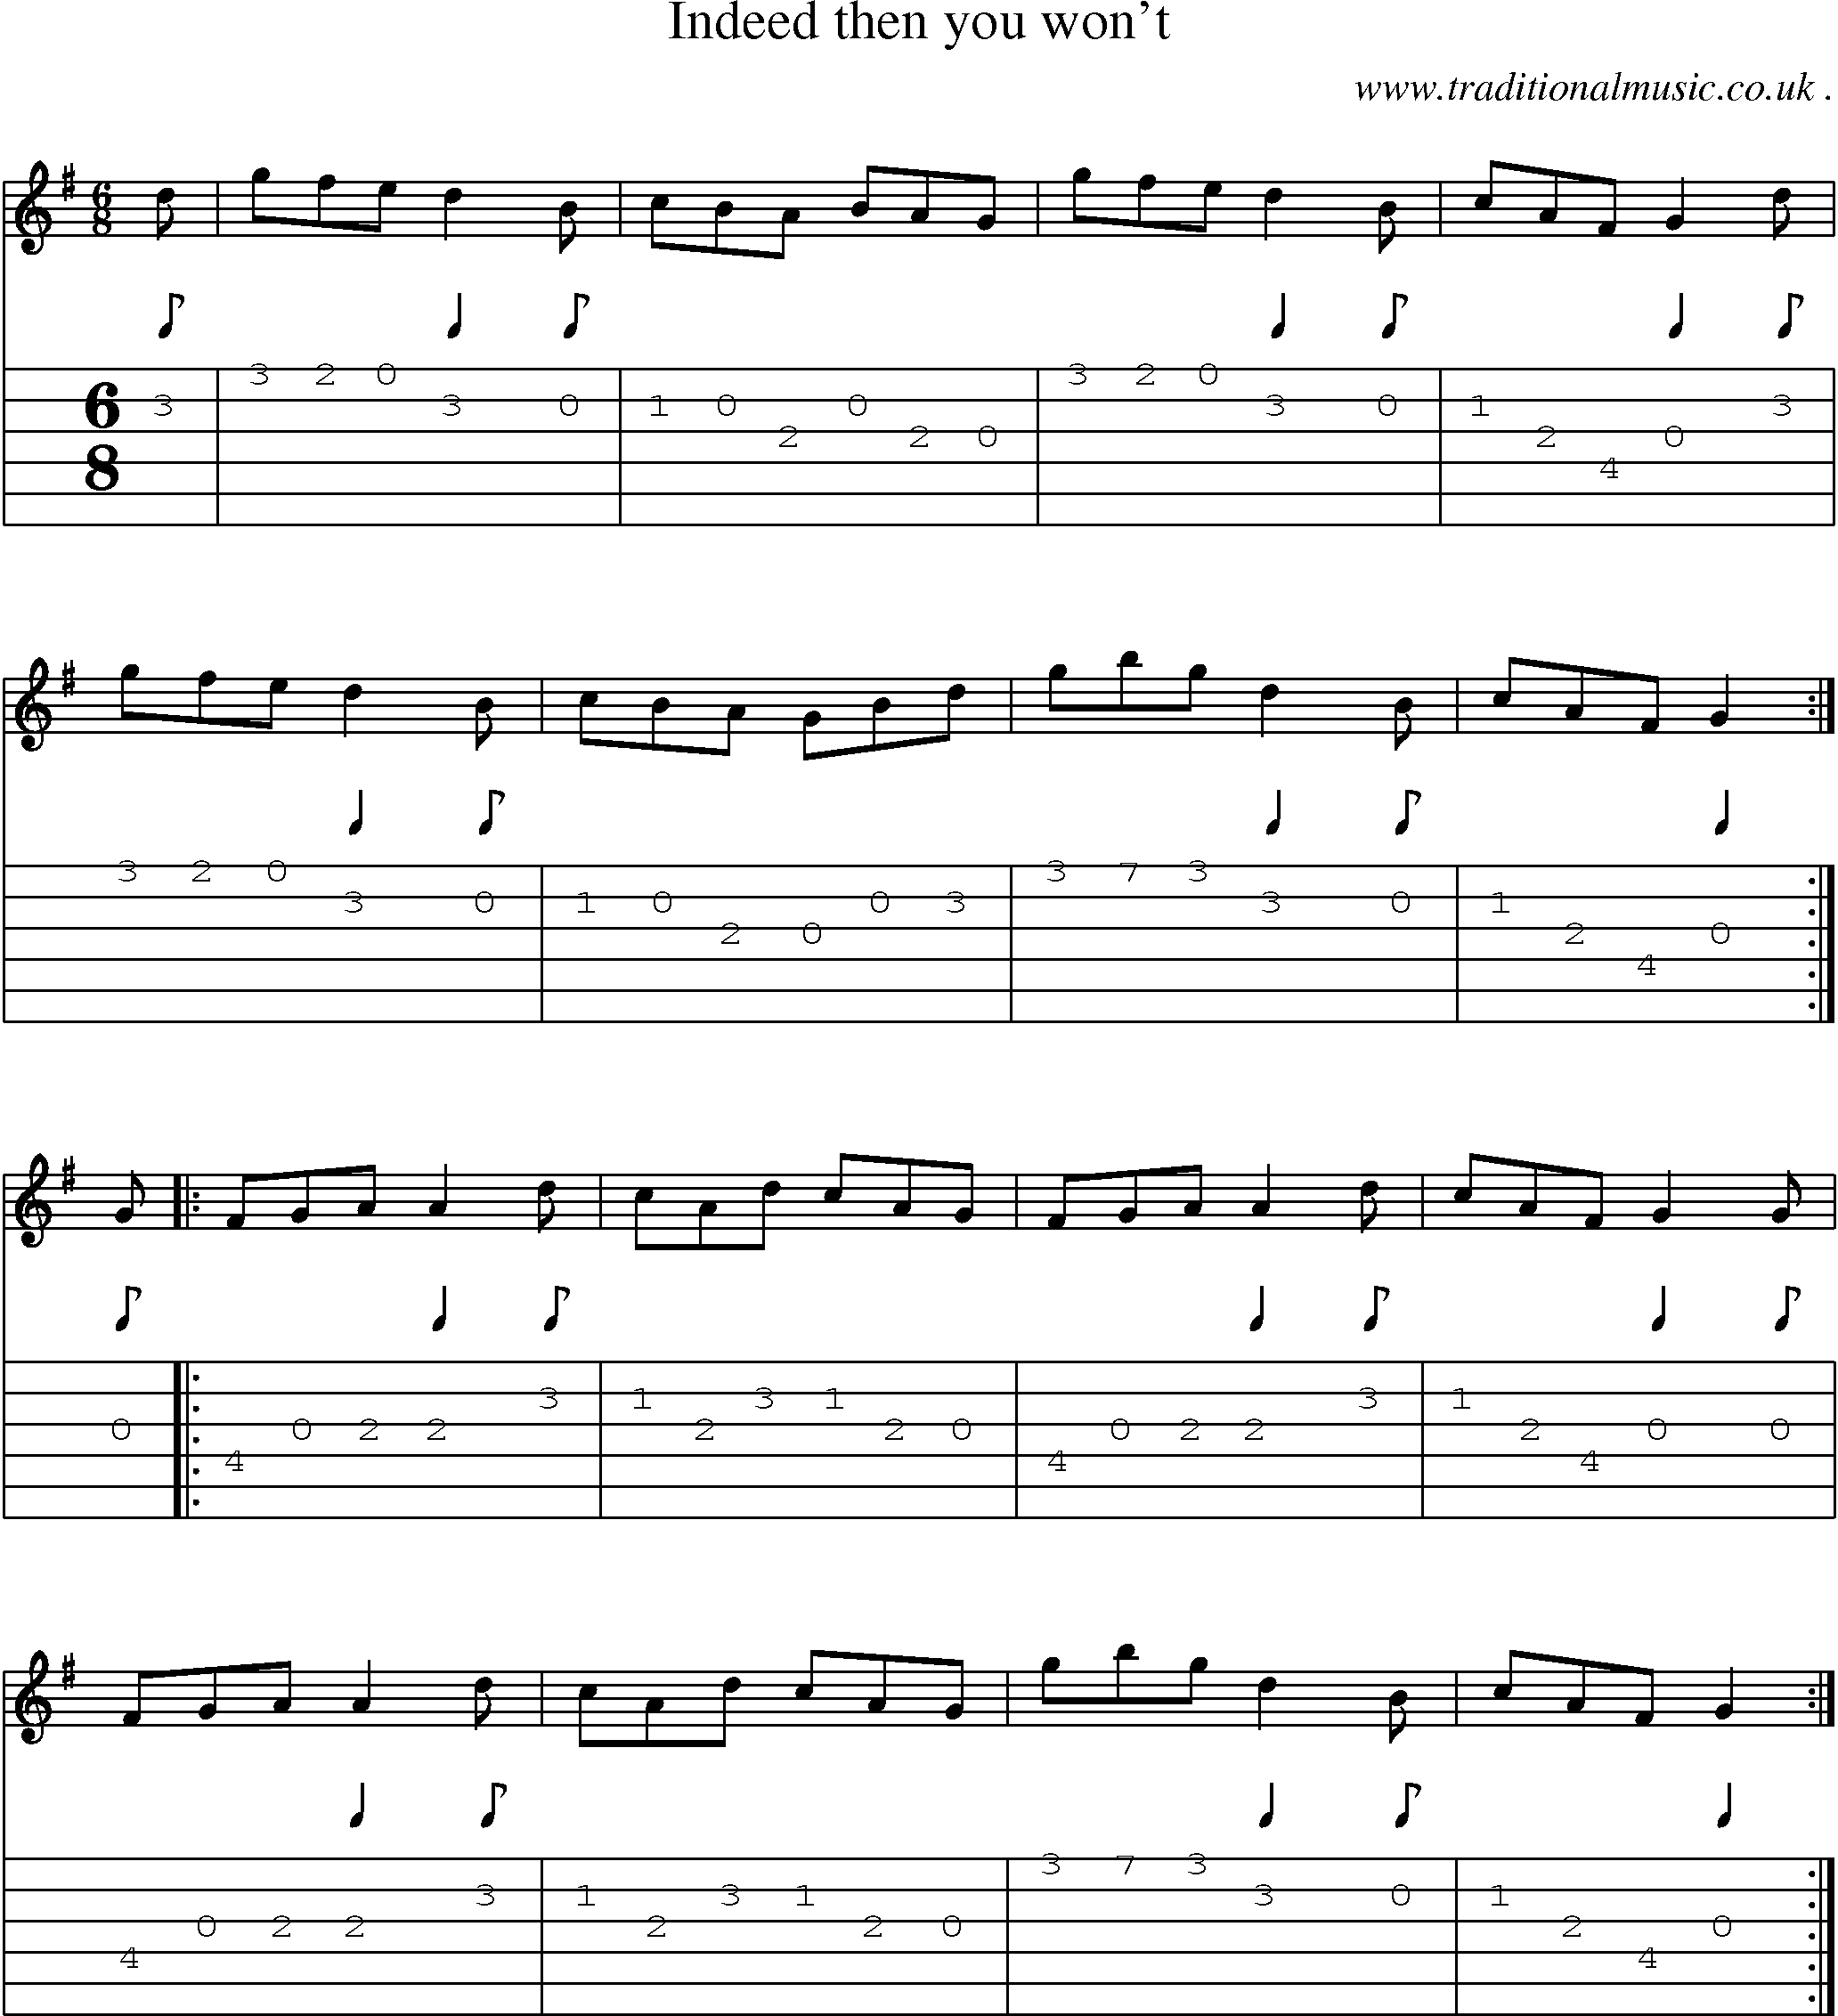 Sheet-Music and Guitar Tabs for Indeed Then You Wont